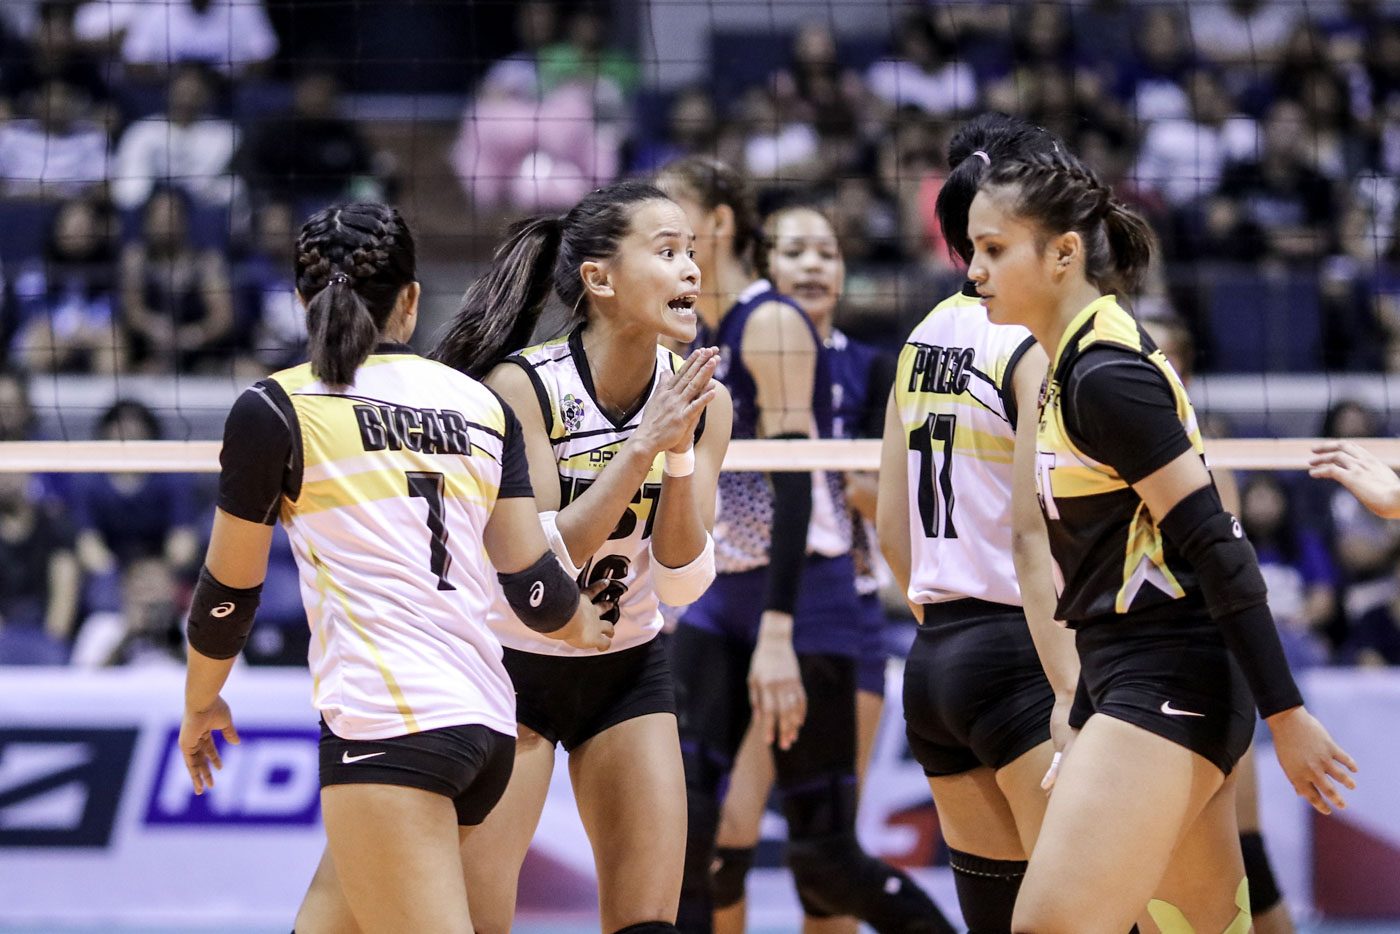 ‘What’s-important-now’ mind-set fuels UST Golden Tigresses to finish strong